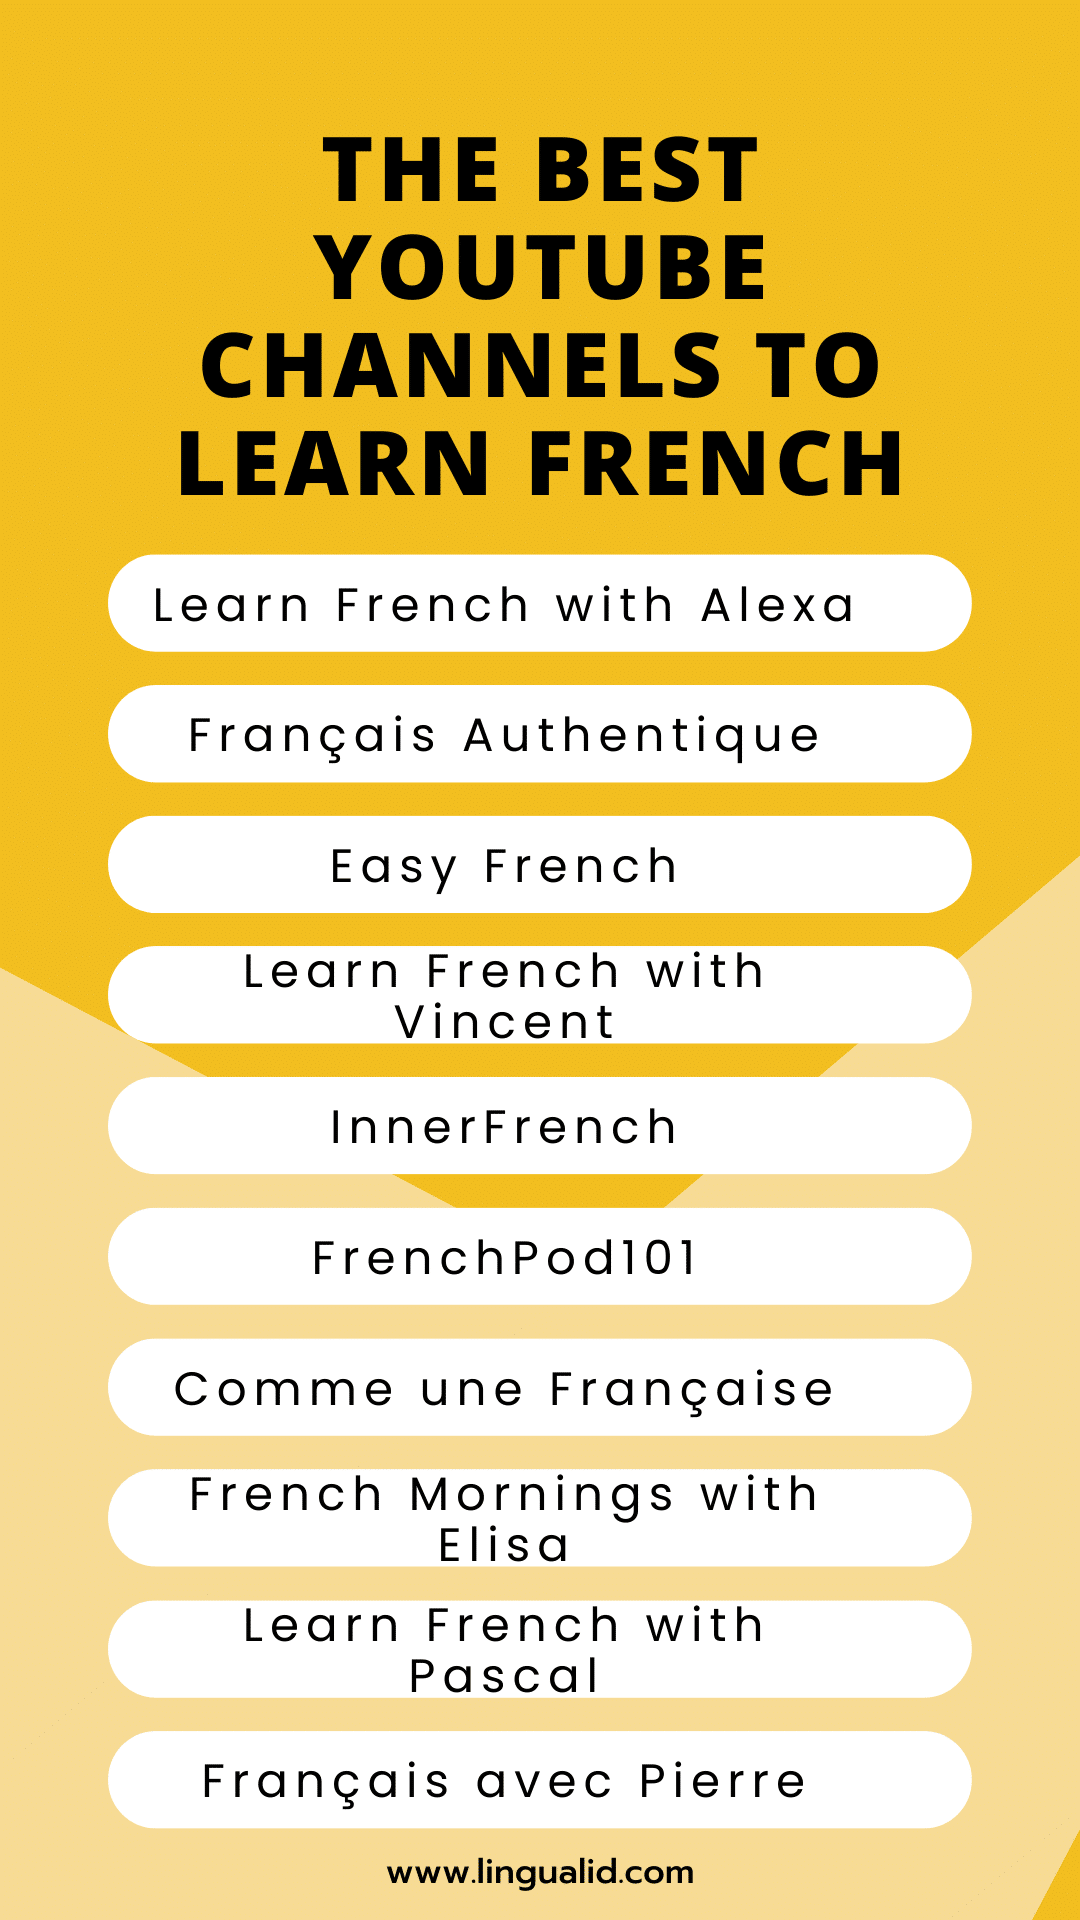 Best YouTube Channels to Learn French 2